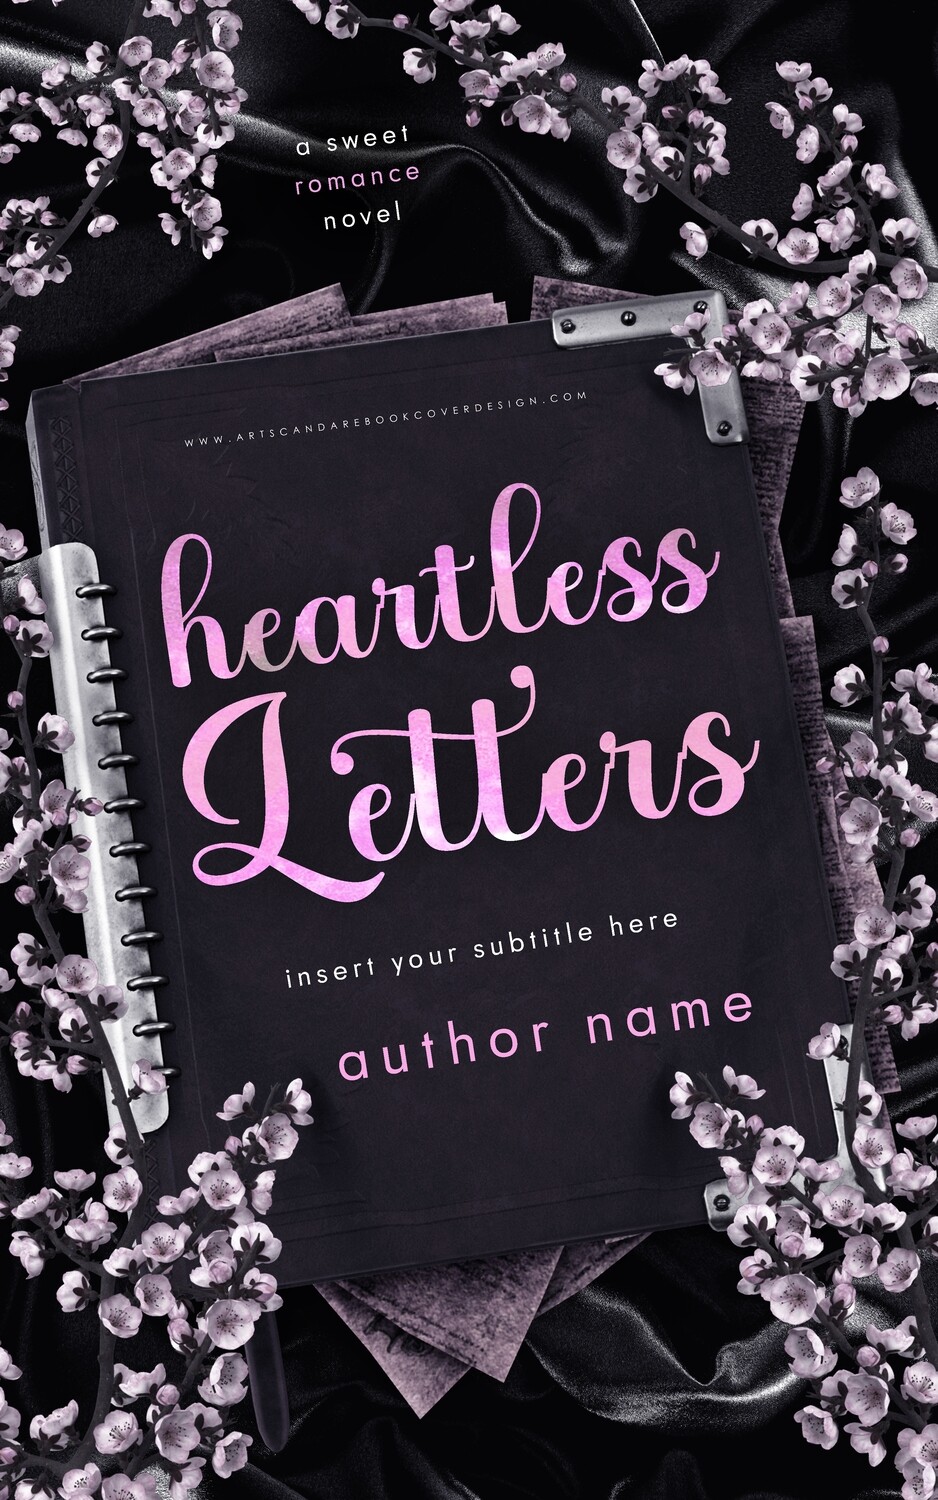 Ebook: Heartless Letters